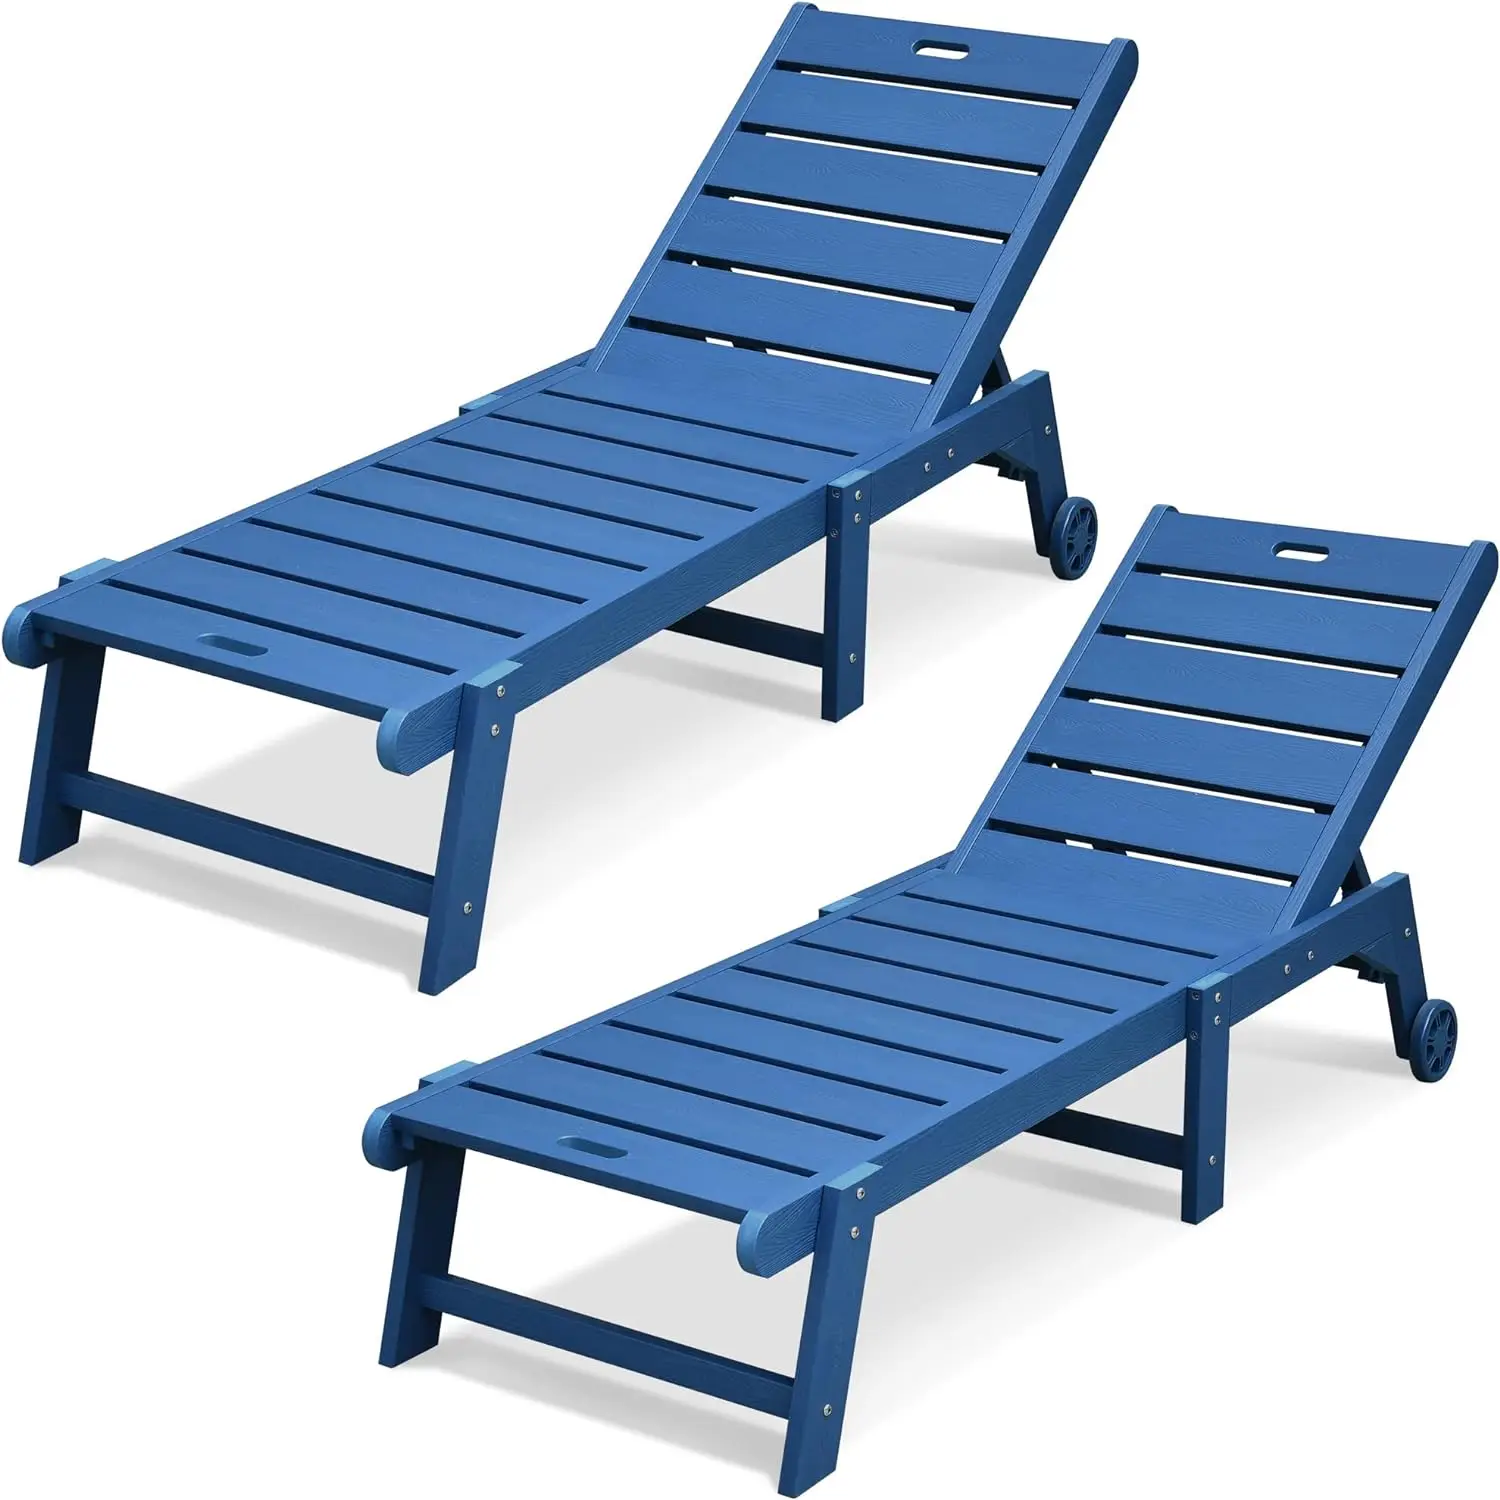 

DWVO Outdoor Chaise Lounge Chairs Set of 2, Patio Lounge Chair with 5-Position Adjustable Backrest